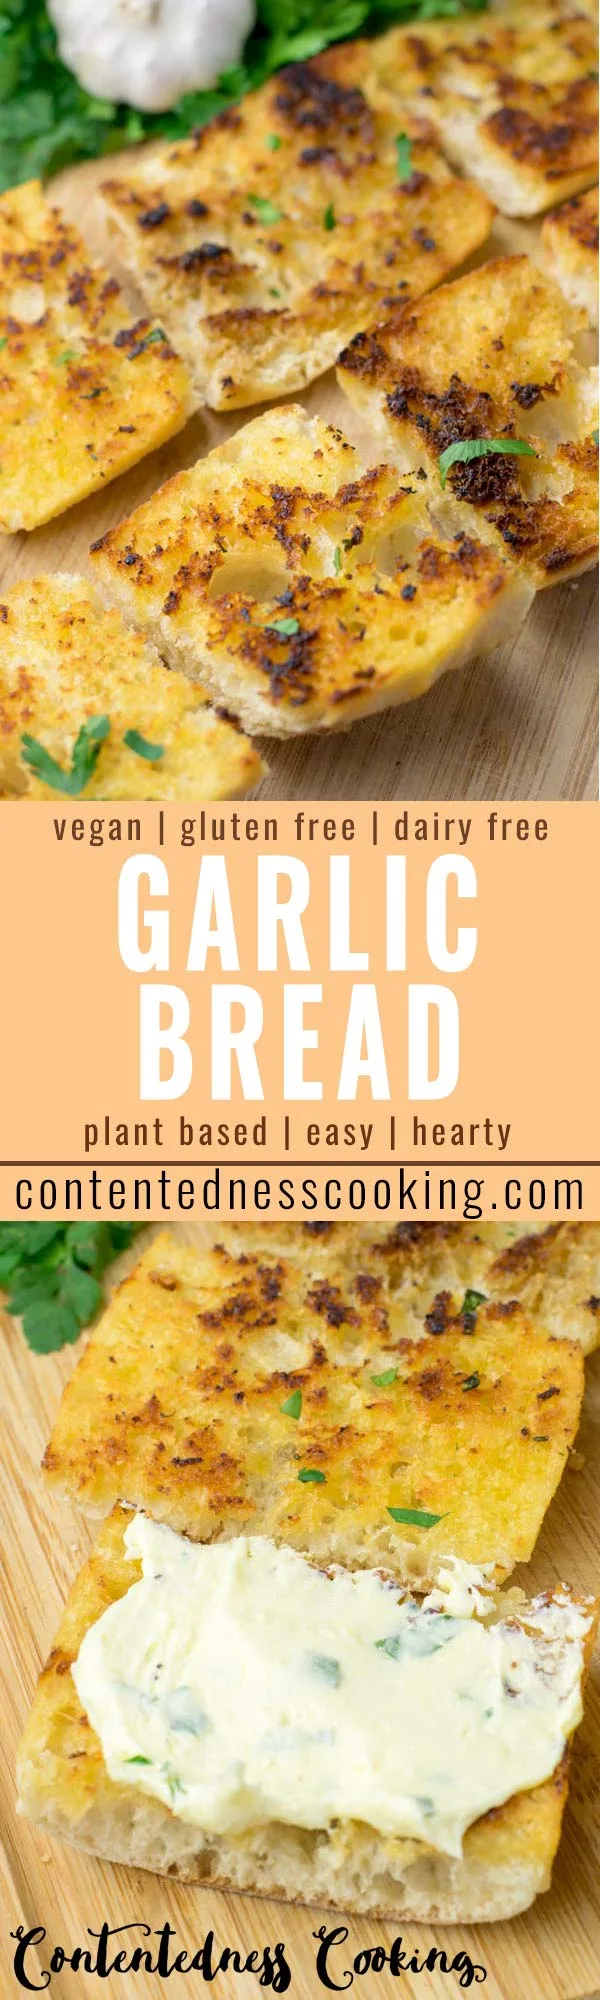  This Garlic Bread is super easy to make and the ultimate comfort food for everyone. No one would ever guess it is entirely vegan, gluten free, taste so delicious like the real deal If not better that the whole family will always love for dinner, lunch, meal prep and so much more. . #vegan #dairyfree #glutenfree #dairyfree #vegetarian #budgetmeals #dinner #lunch #contentednesscooking #garlicbread #familyfood #kidsmeals #worklunchideas #mealprep #comfortfood #partyfood #appetizers 